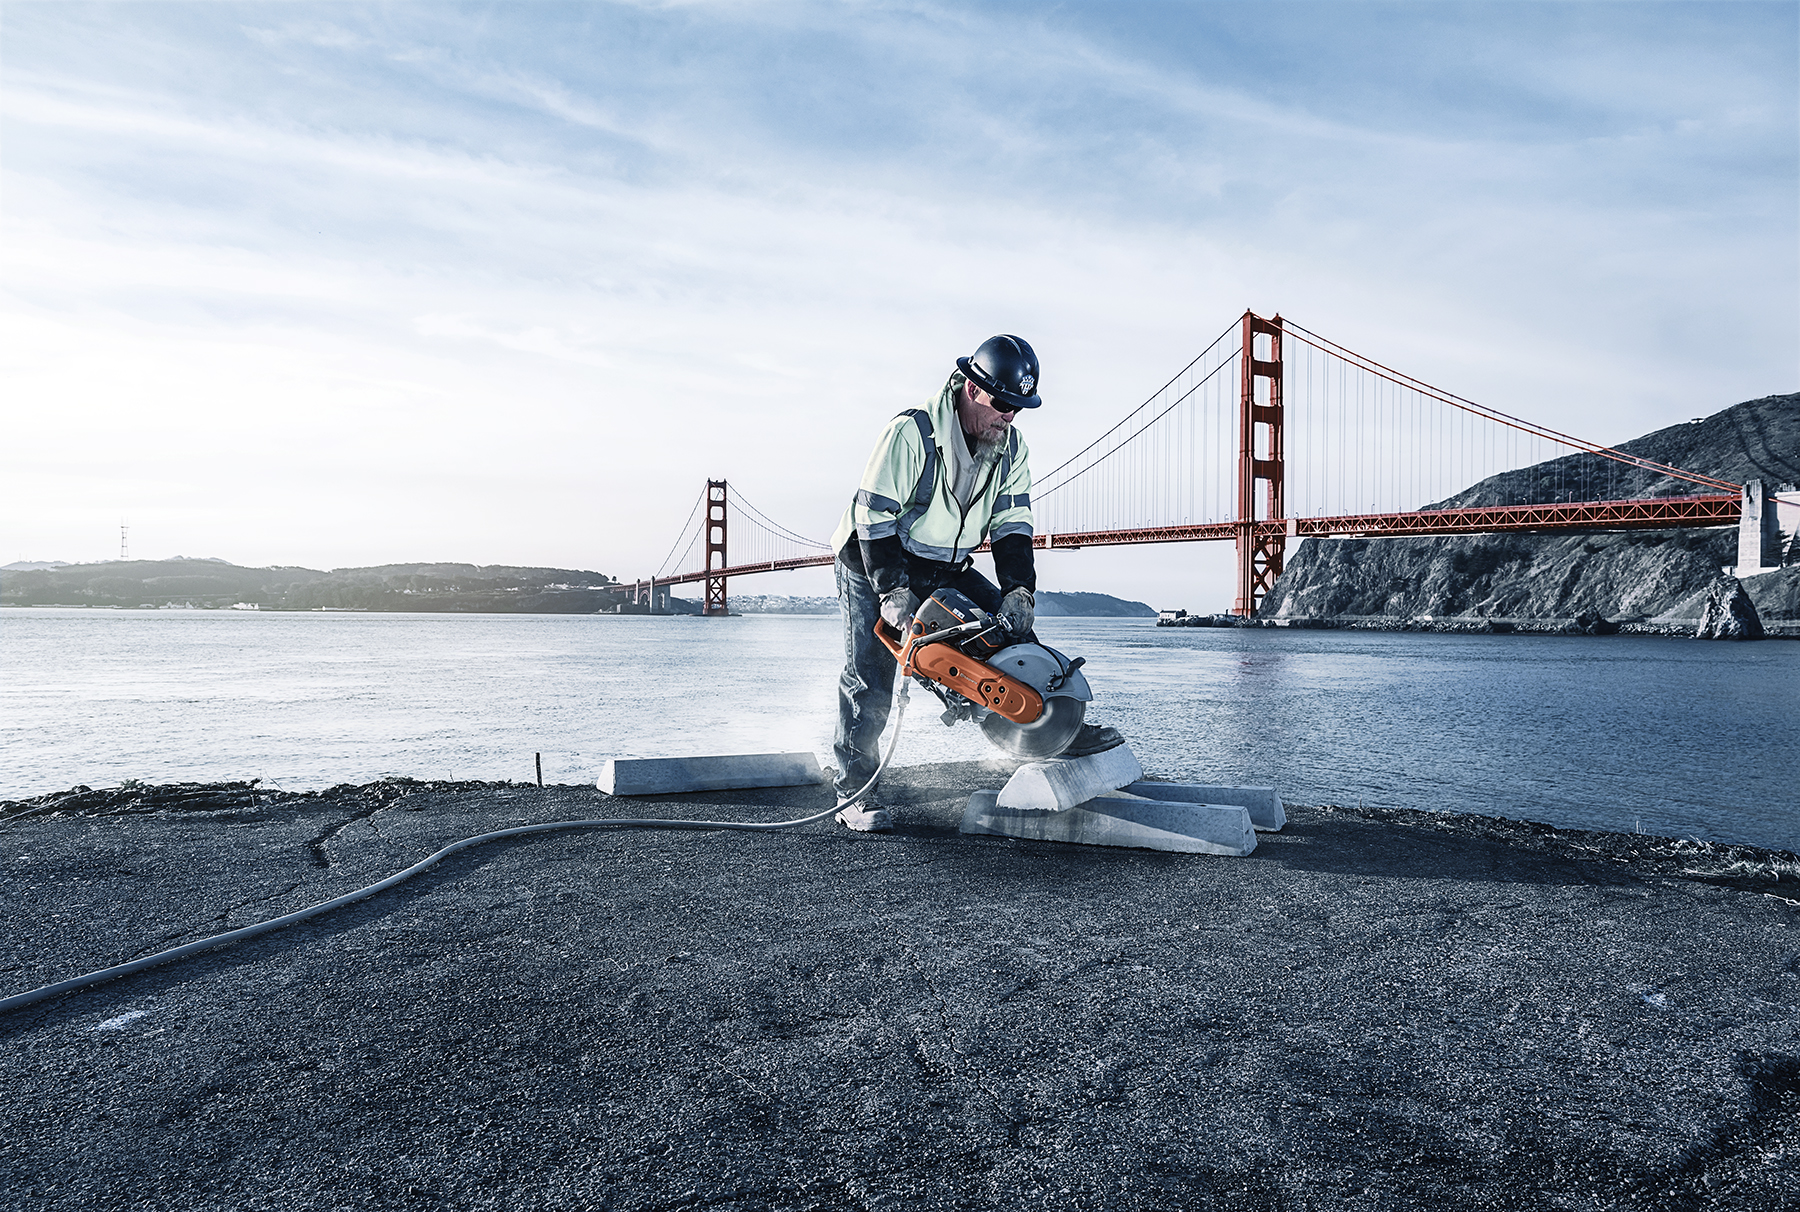 Husqvarna saw being used by the Golden Gate Bridge